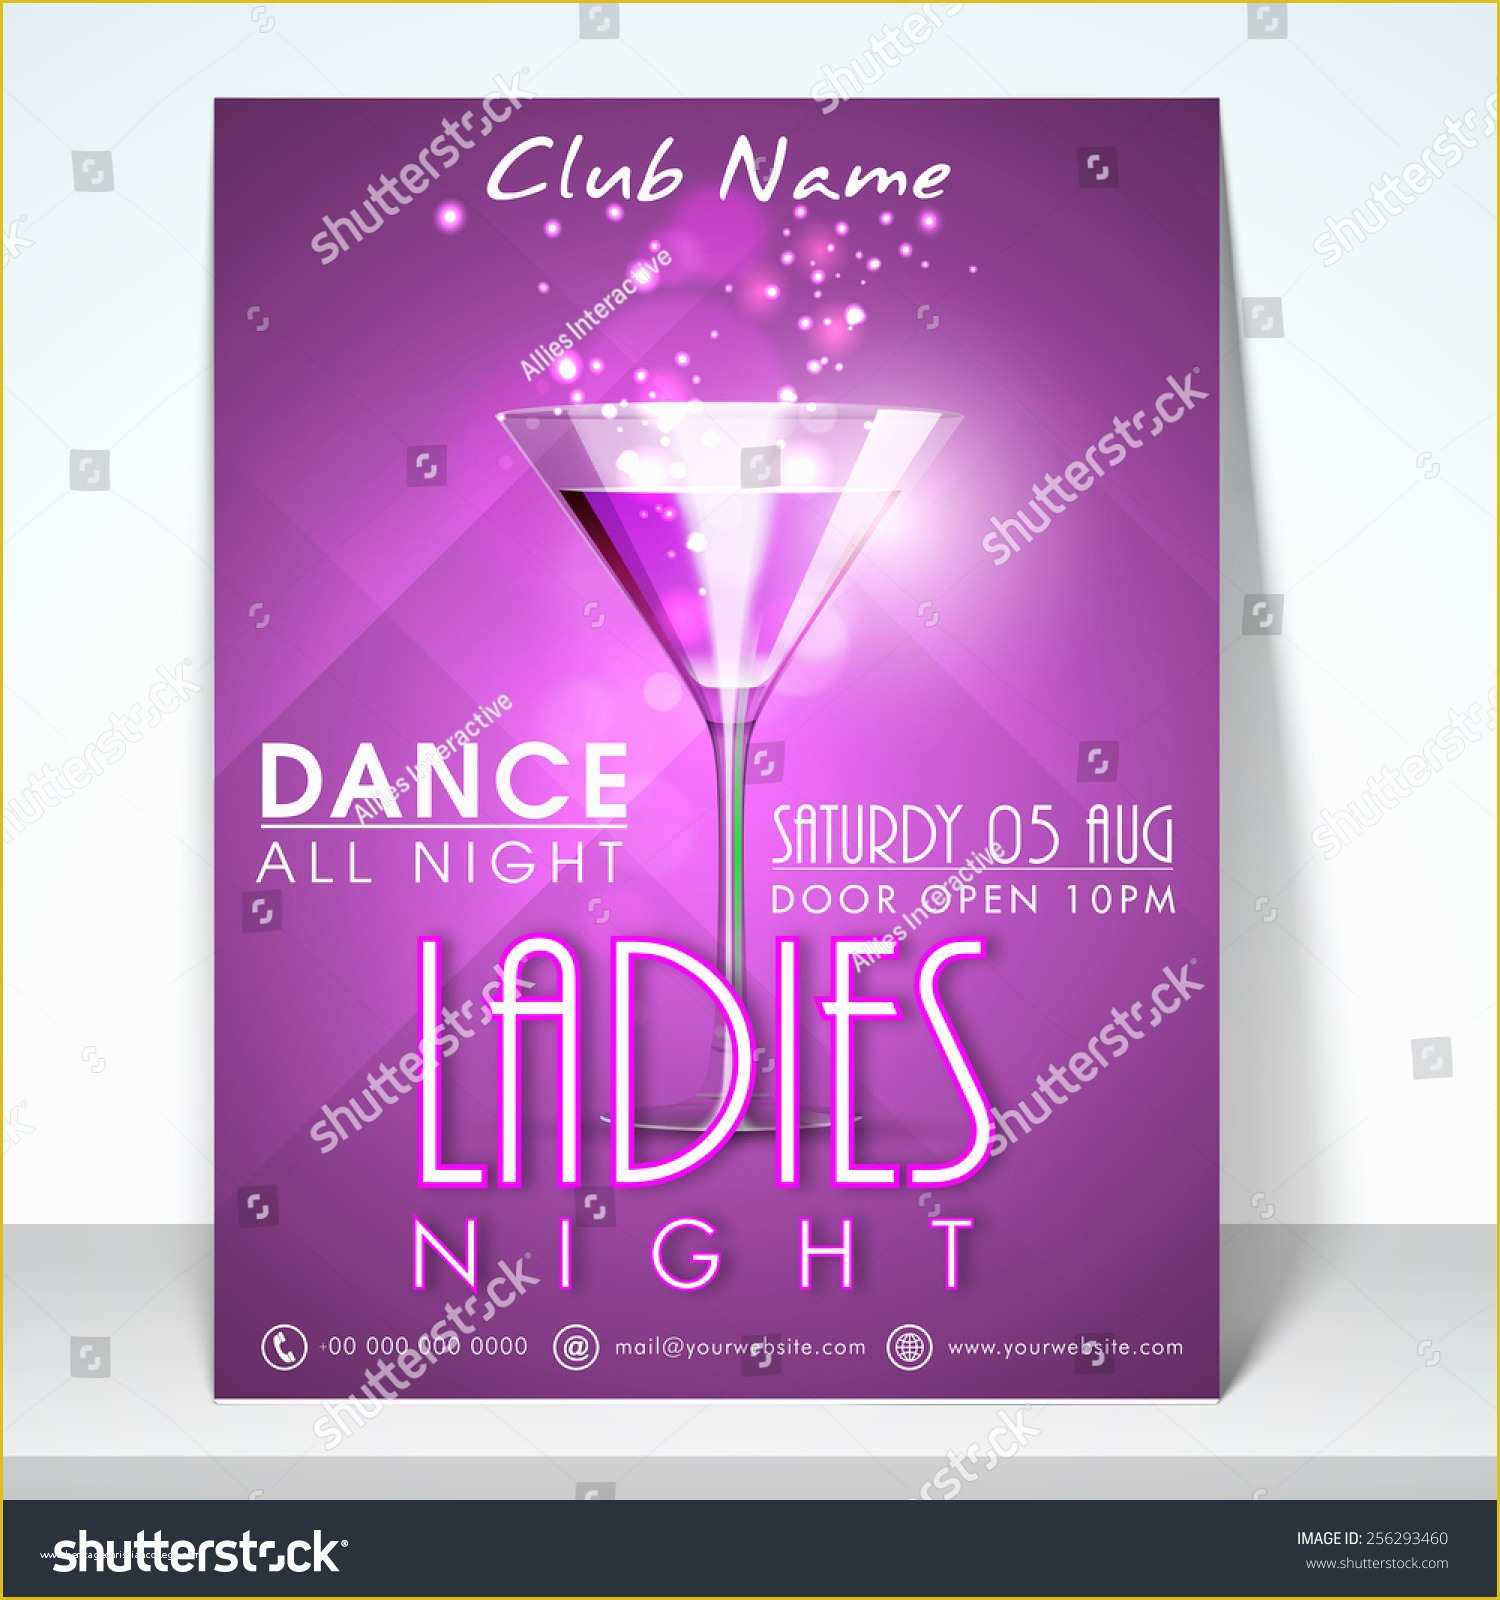 Ladies Night Out Flyer Template Free Of Stylish Flyer Banner Template Design for La S Night